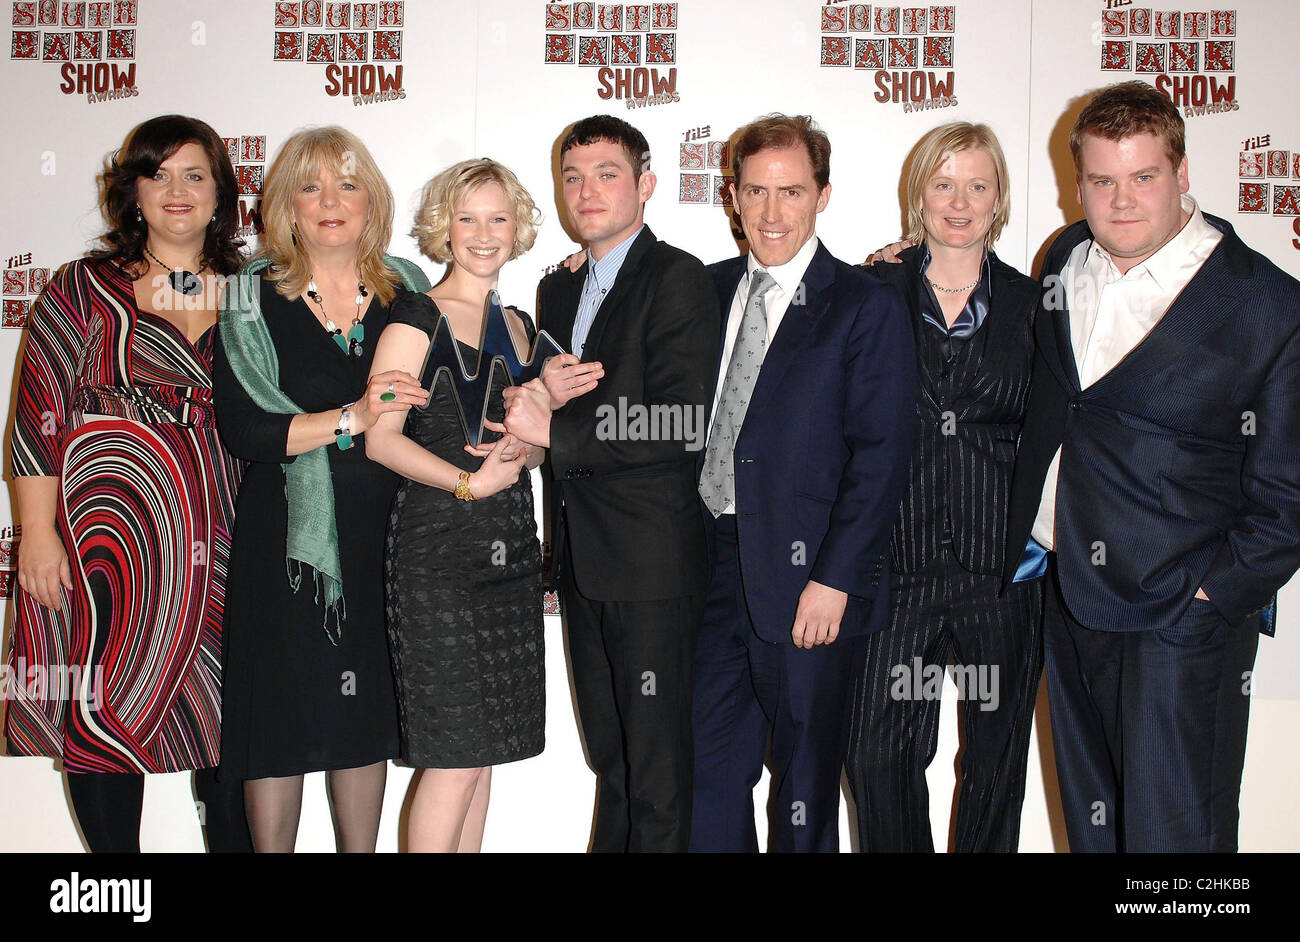 Ruth Jones, Alison Steadman, Joanna Page, Mathew Horne, Rob Brydon, and James Corden pose with the award for Comedy for Gavin & Stock Photo